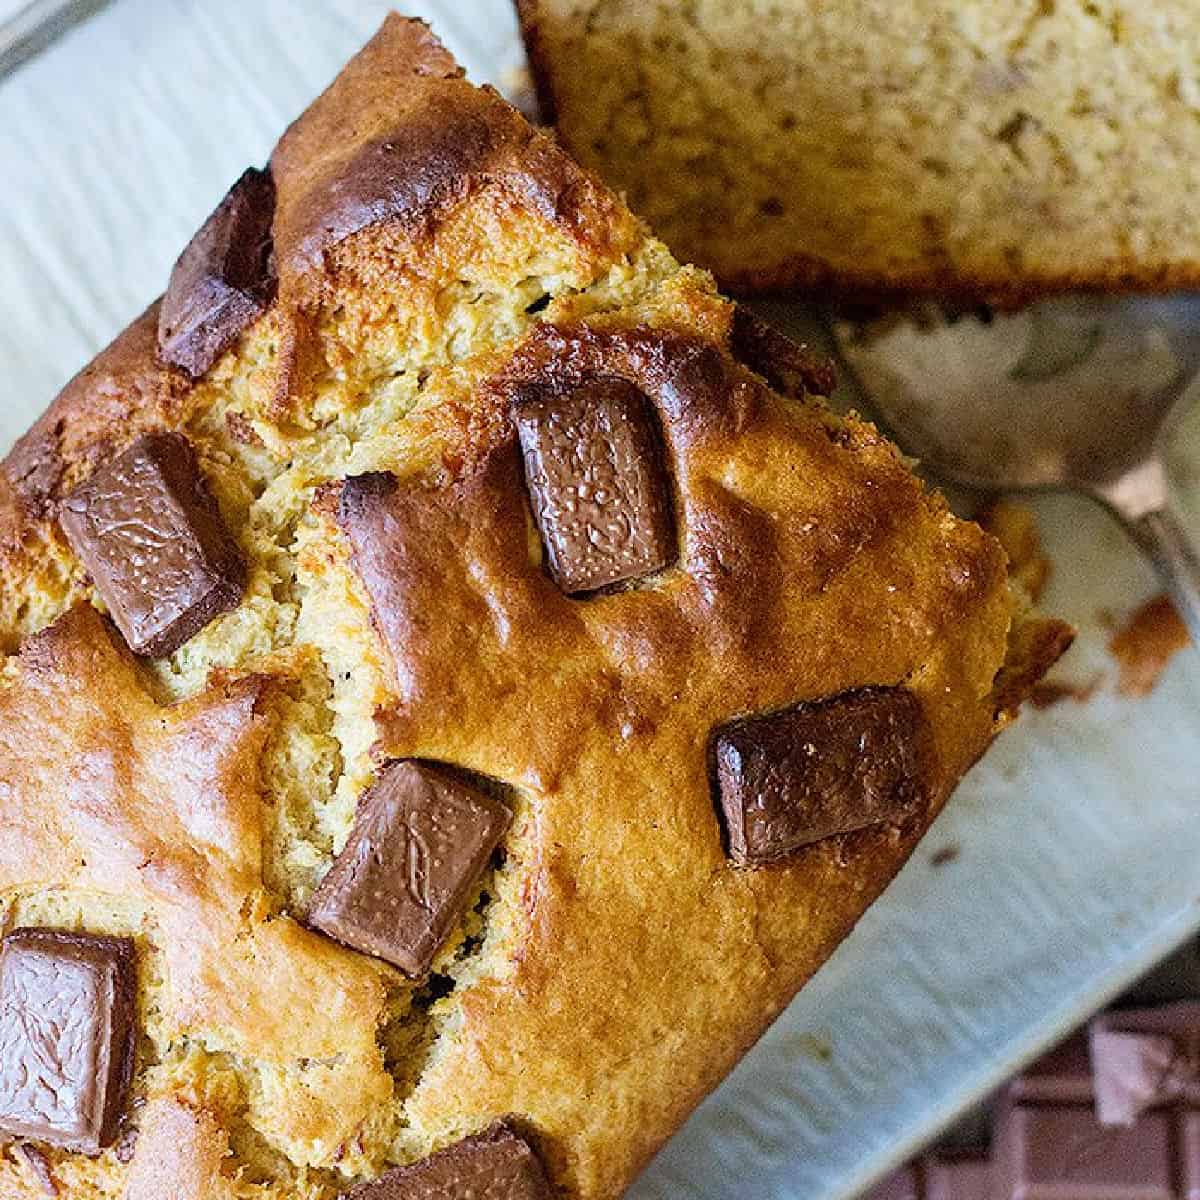 Peanut butter banana bread is a simple banana bread recipe that everyone loves. This moist banana bread with peanut butter is super simple and delicious. 
